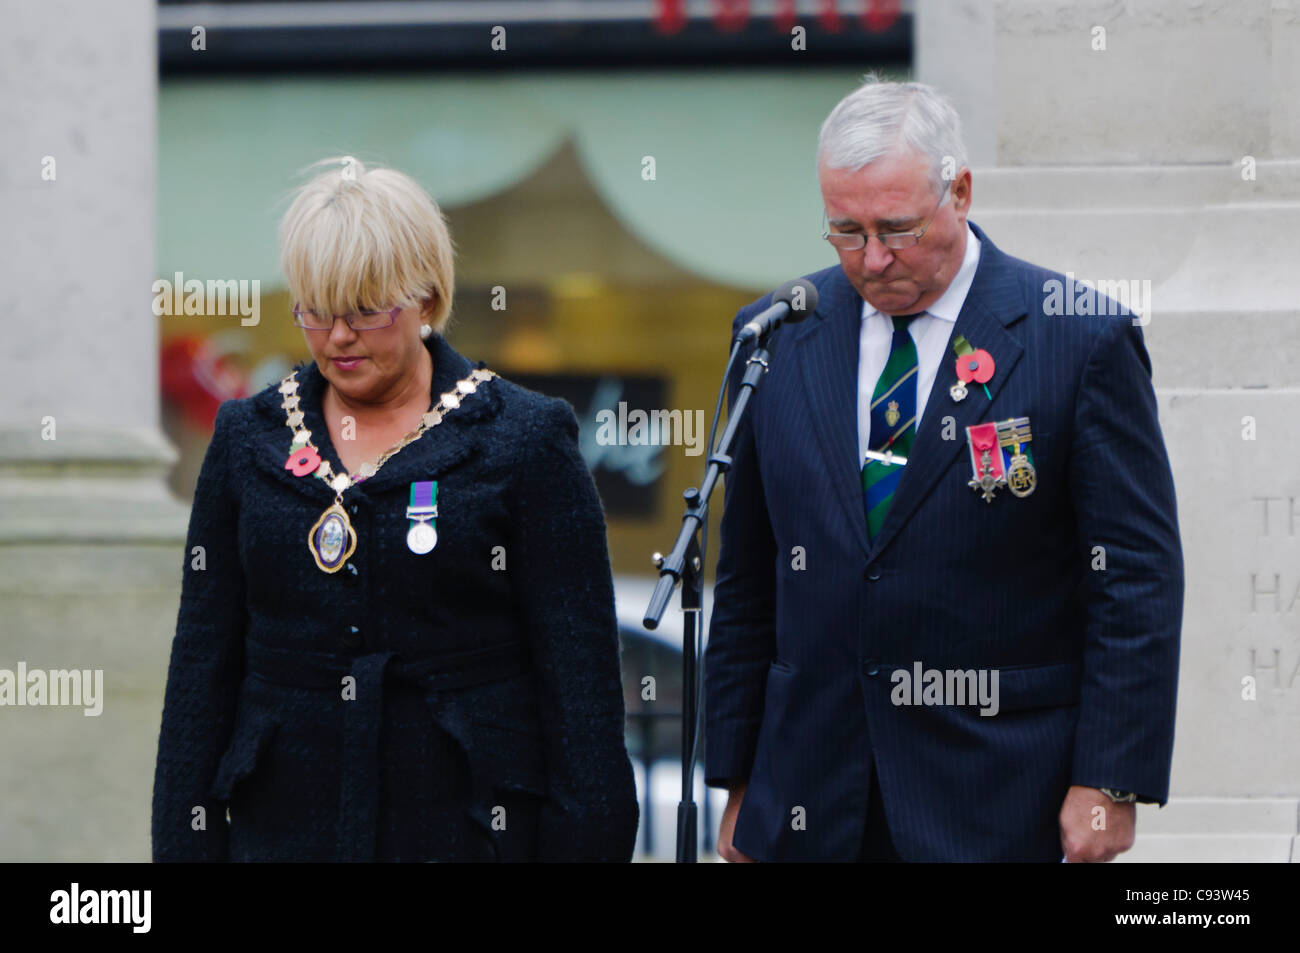 Belfast's Deputy Lord Mayor, DUP councillor Ruth Patterson, and president of the Royal British Legion in Northern Ireland, Mervyn Elder, observe the two minute silence at Belfast City Hall, Belfast, UK on 11/11/2011. Stock Photo